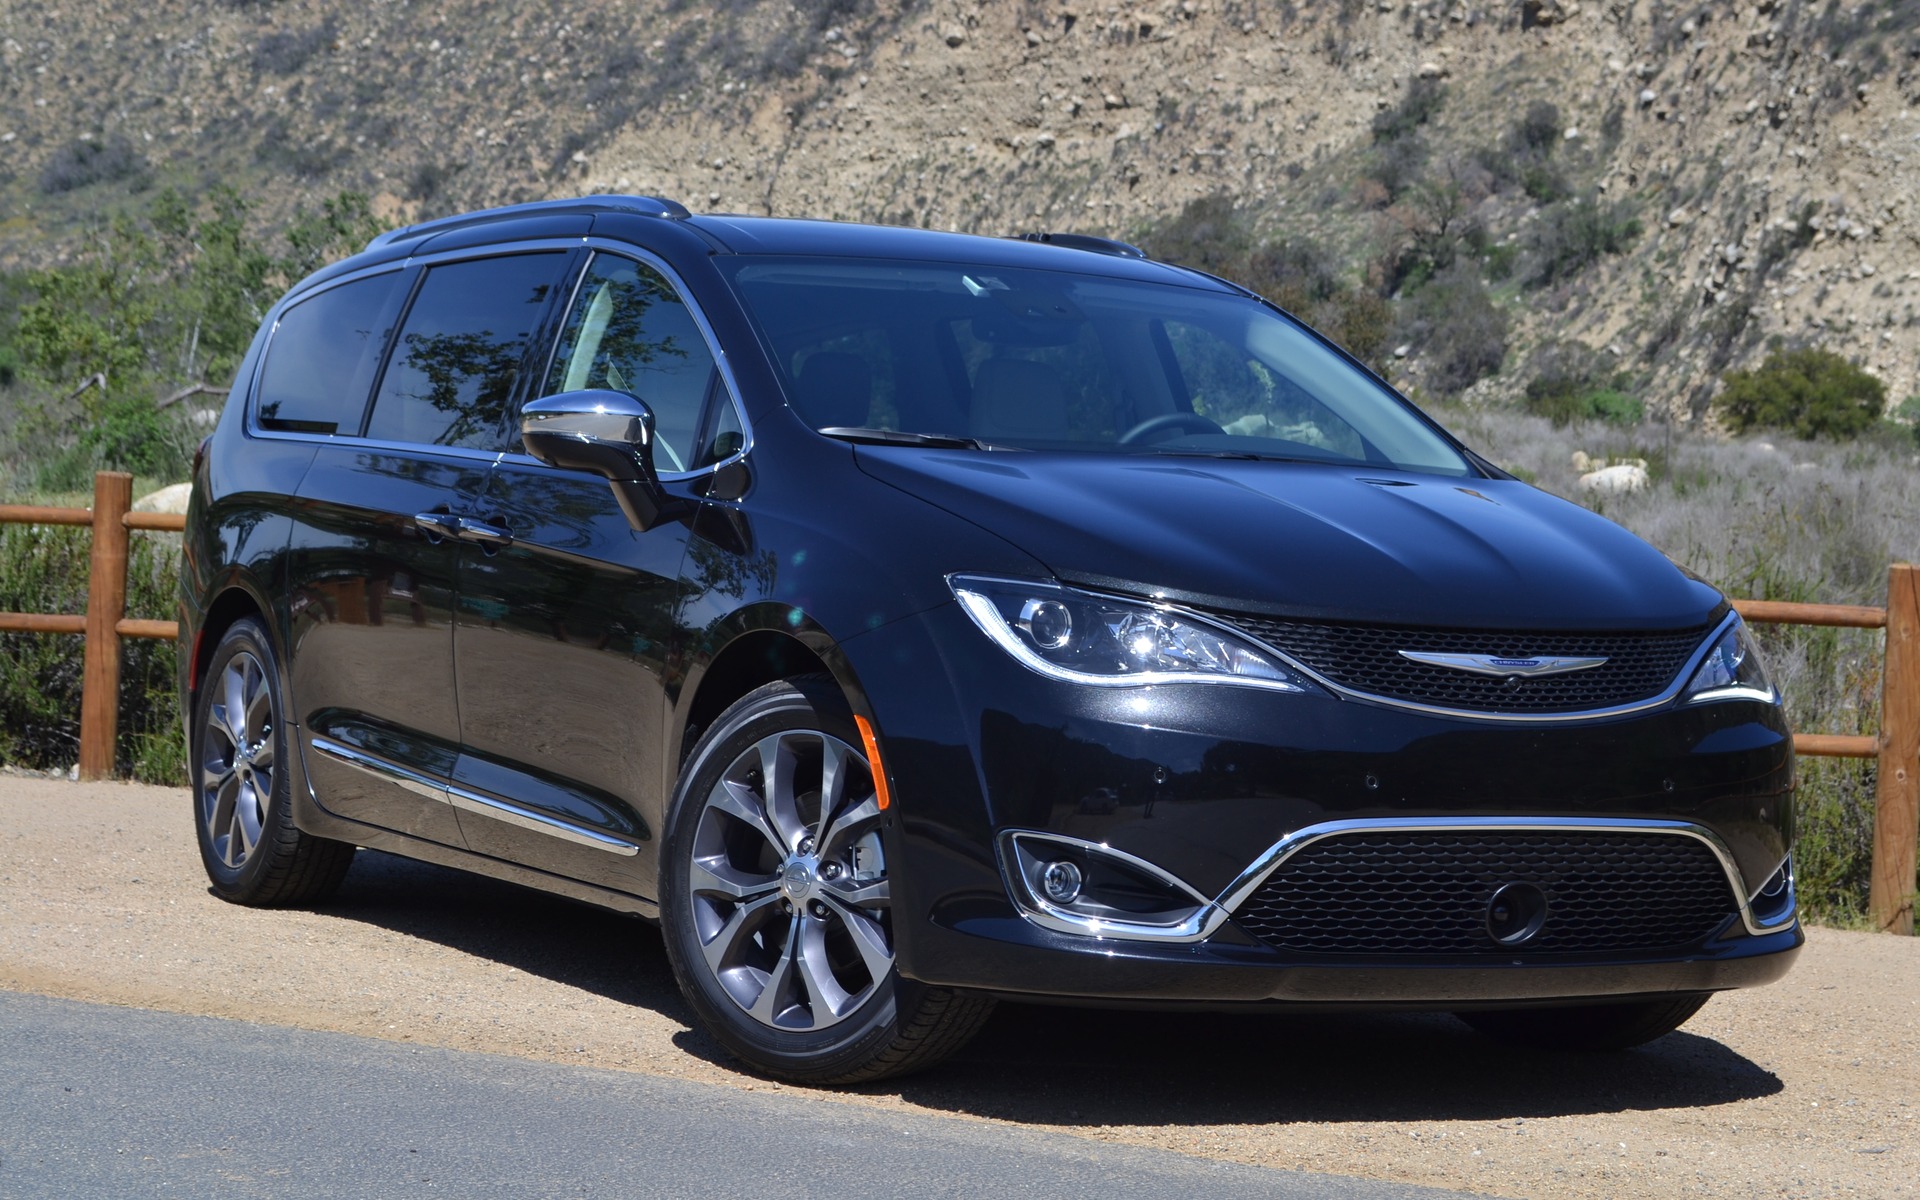 2017 Chrysler Pacifica: When Luxury Meets Family - The Car Guide